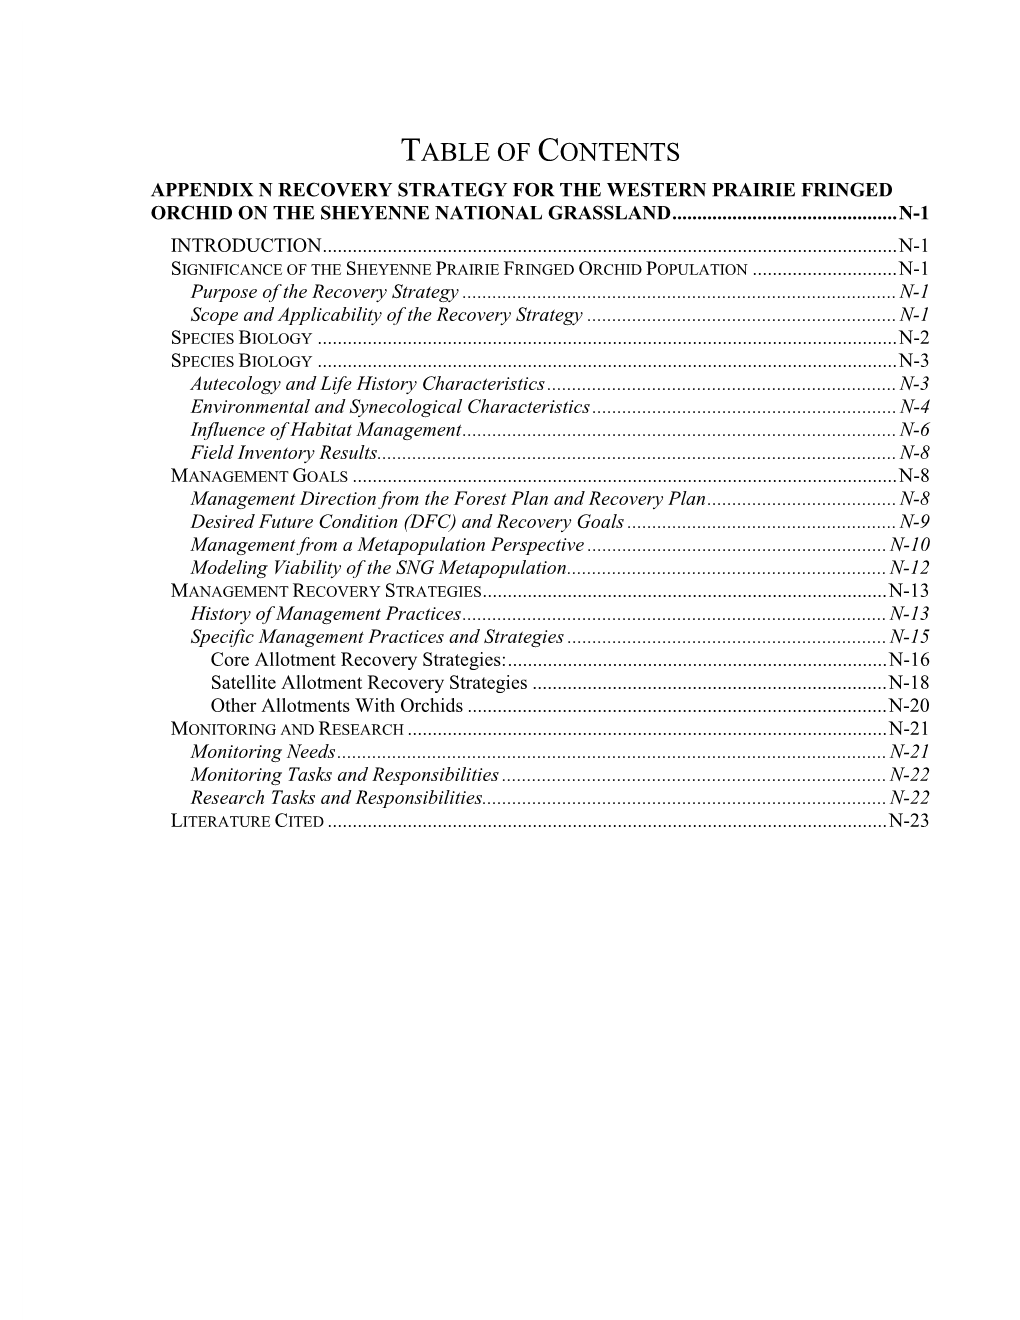 Table of Contents Appendix N Recovery Strategy for the Western Prairie Fringed Orchid on the Sheyenne National Grassland